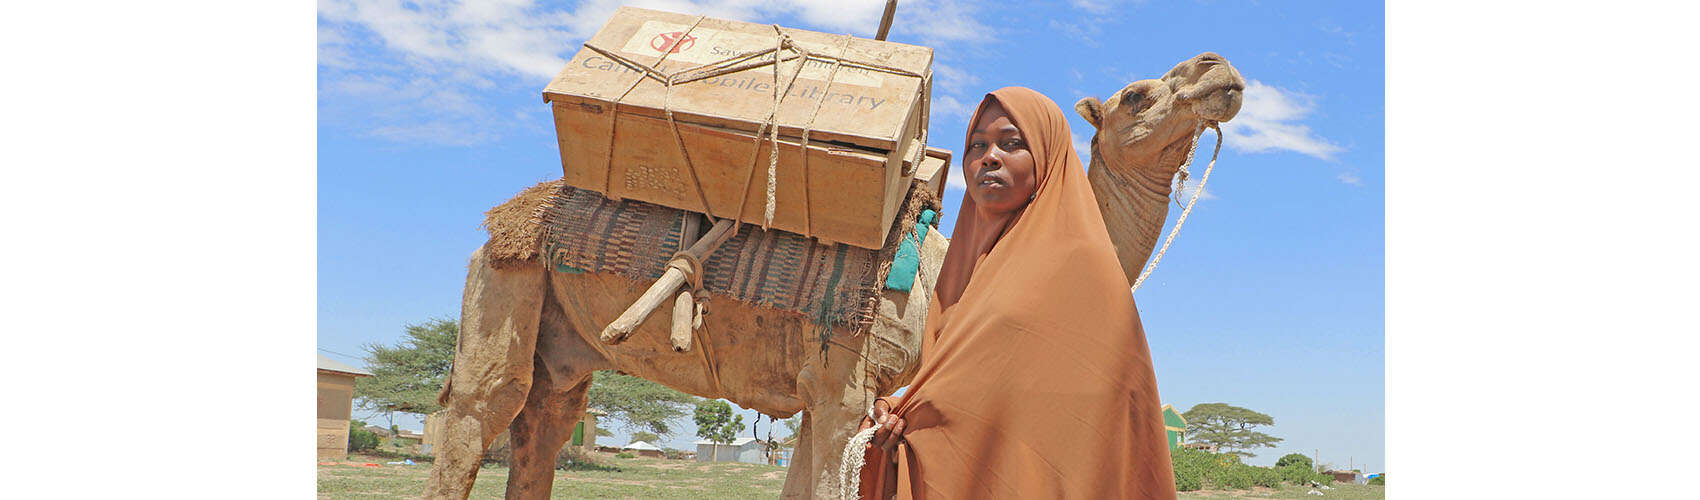 Maha, 13, is holding the lead to a camel, which carries a portable library on its back.